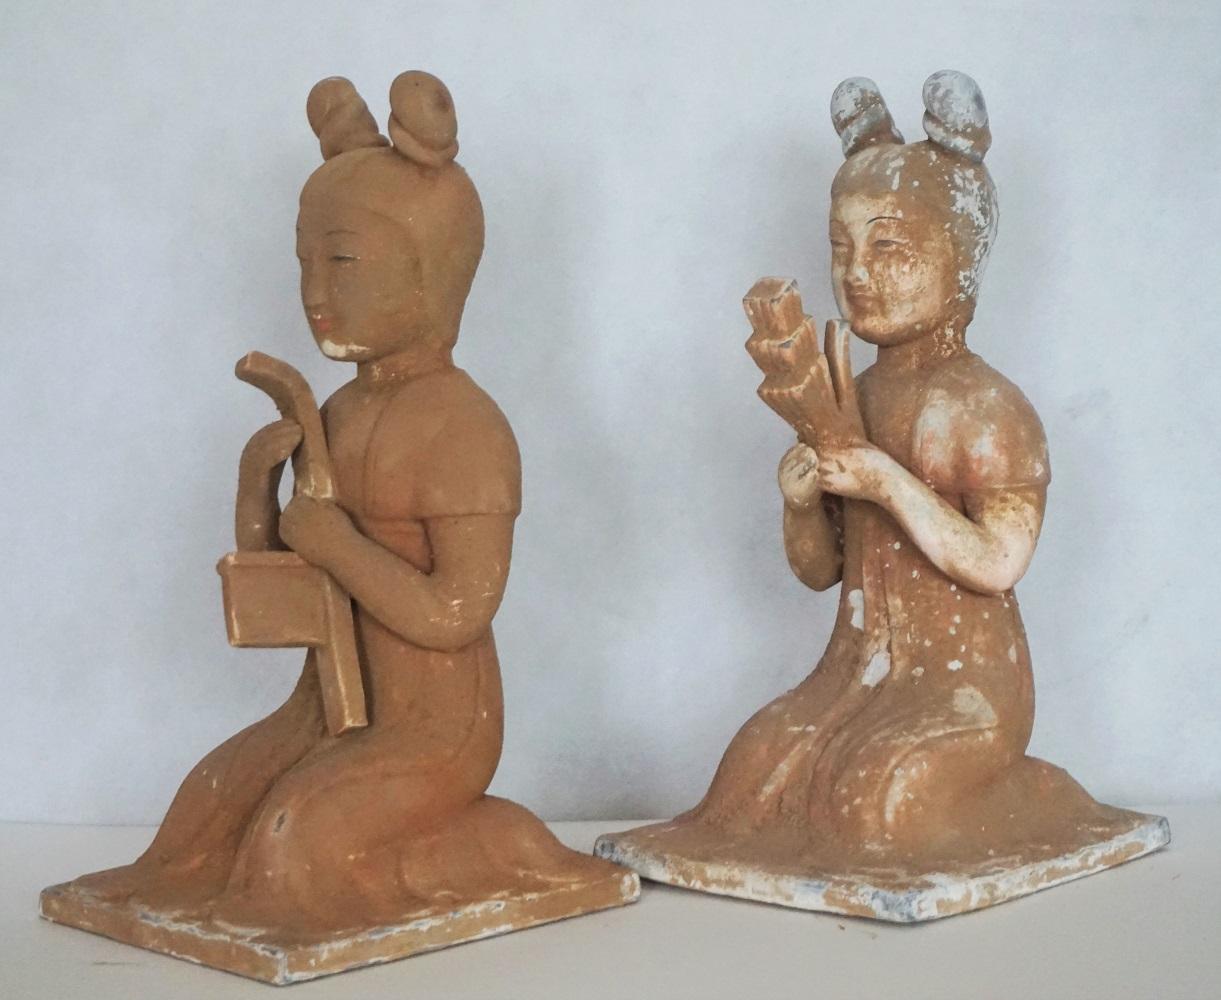 Hand-Crafted Early 20th Century Pair of Japanese Handcrafted Terracotta Female Sculptures For Sale